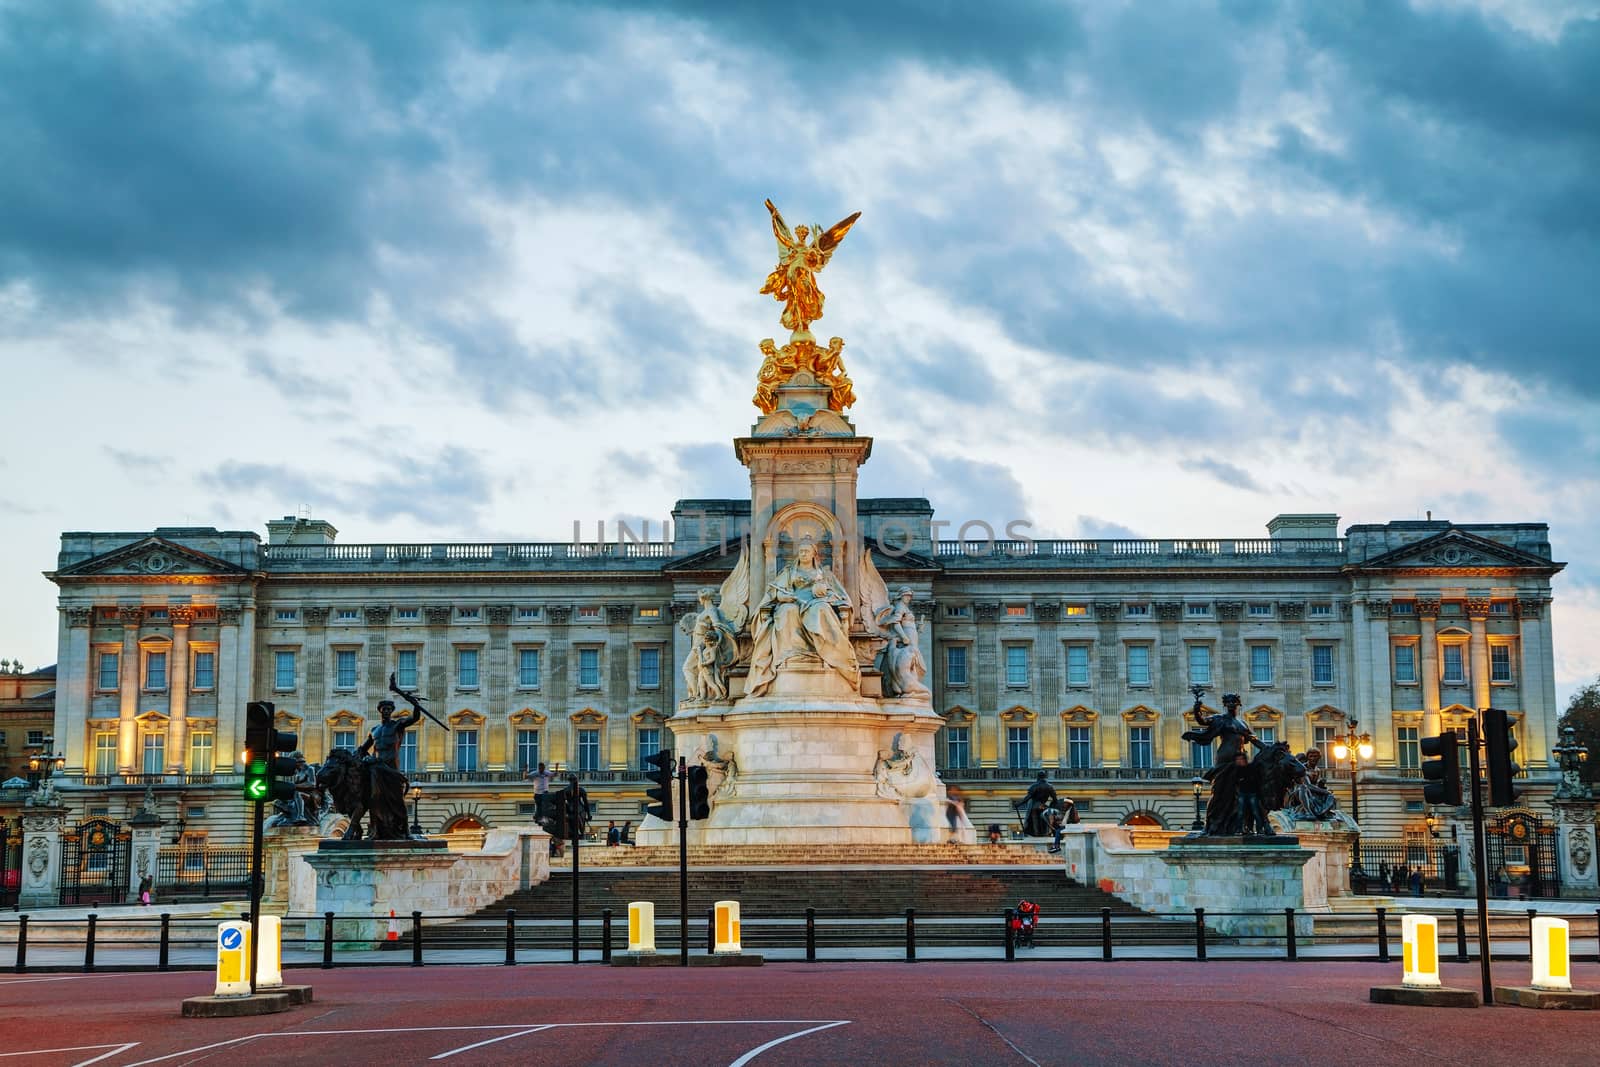 LONDON - APRIL 12: Buckingham palace at sunset on April 12, 2015 in London, UK. It's the London residence and principal workplace of the monarchy of the United Kingdom.